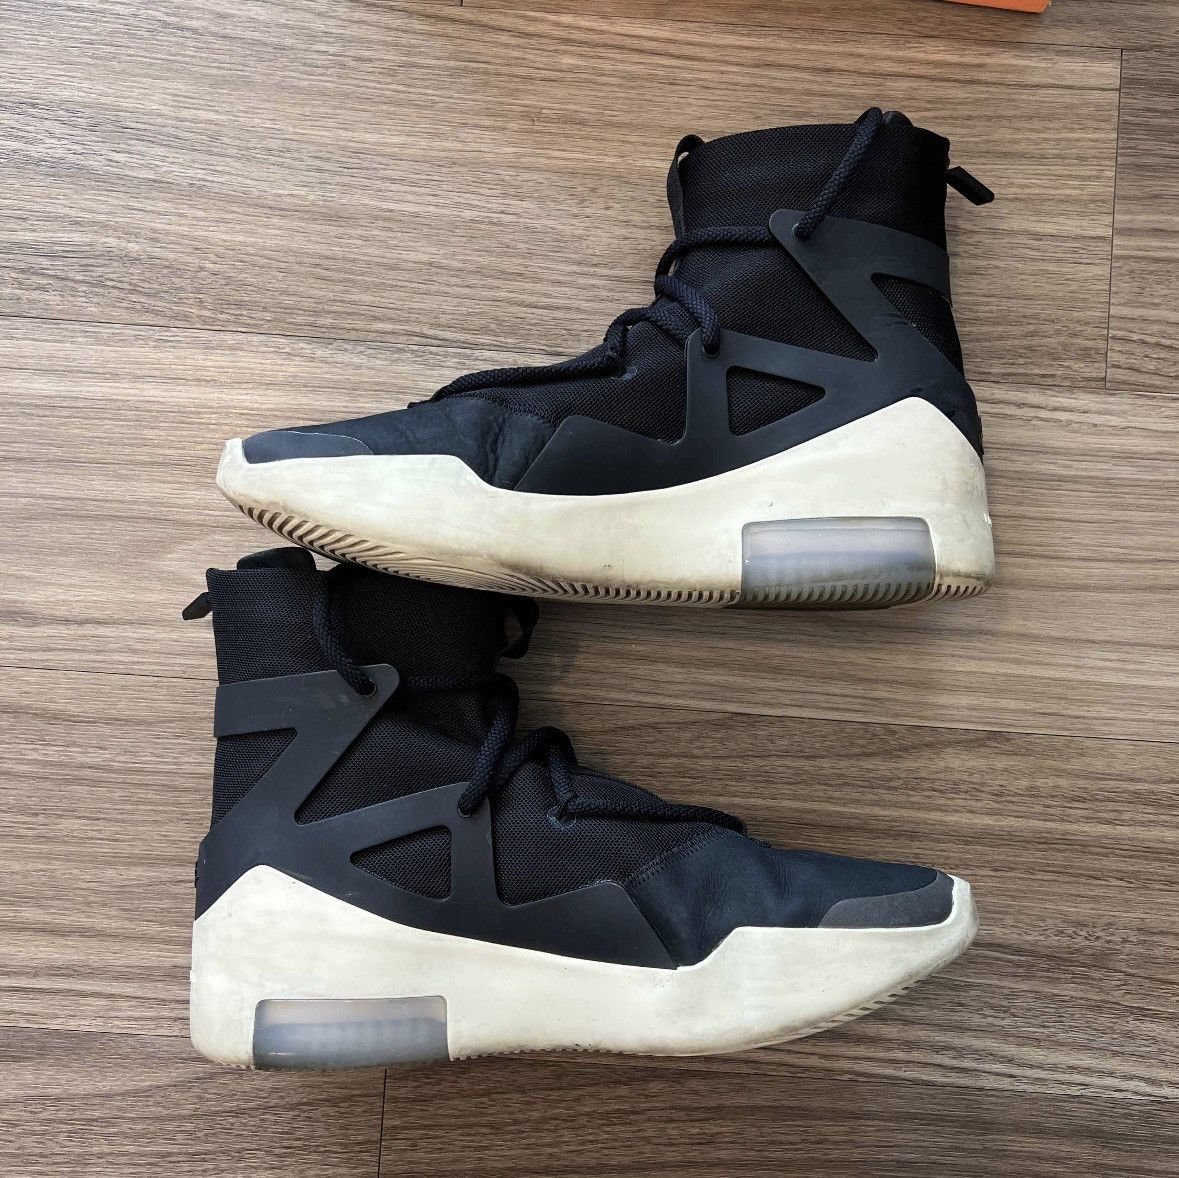 Nike Air Fear Of God “Black” Size US 8.5 / EU 41-42 - 2 Preview